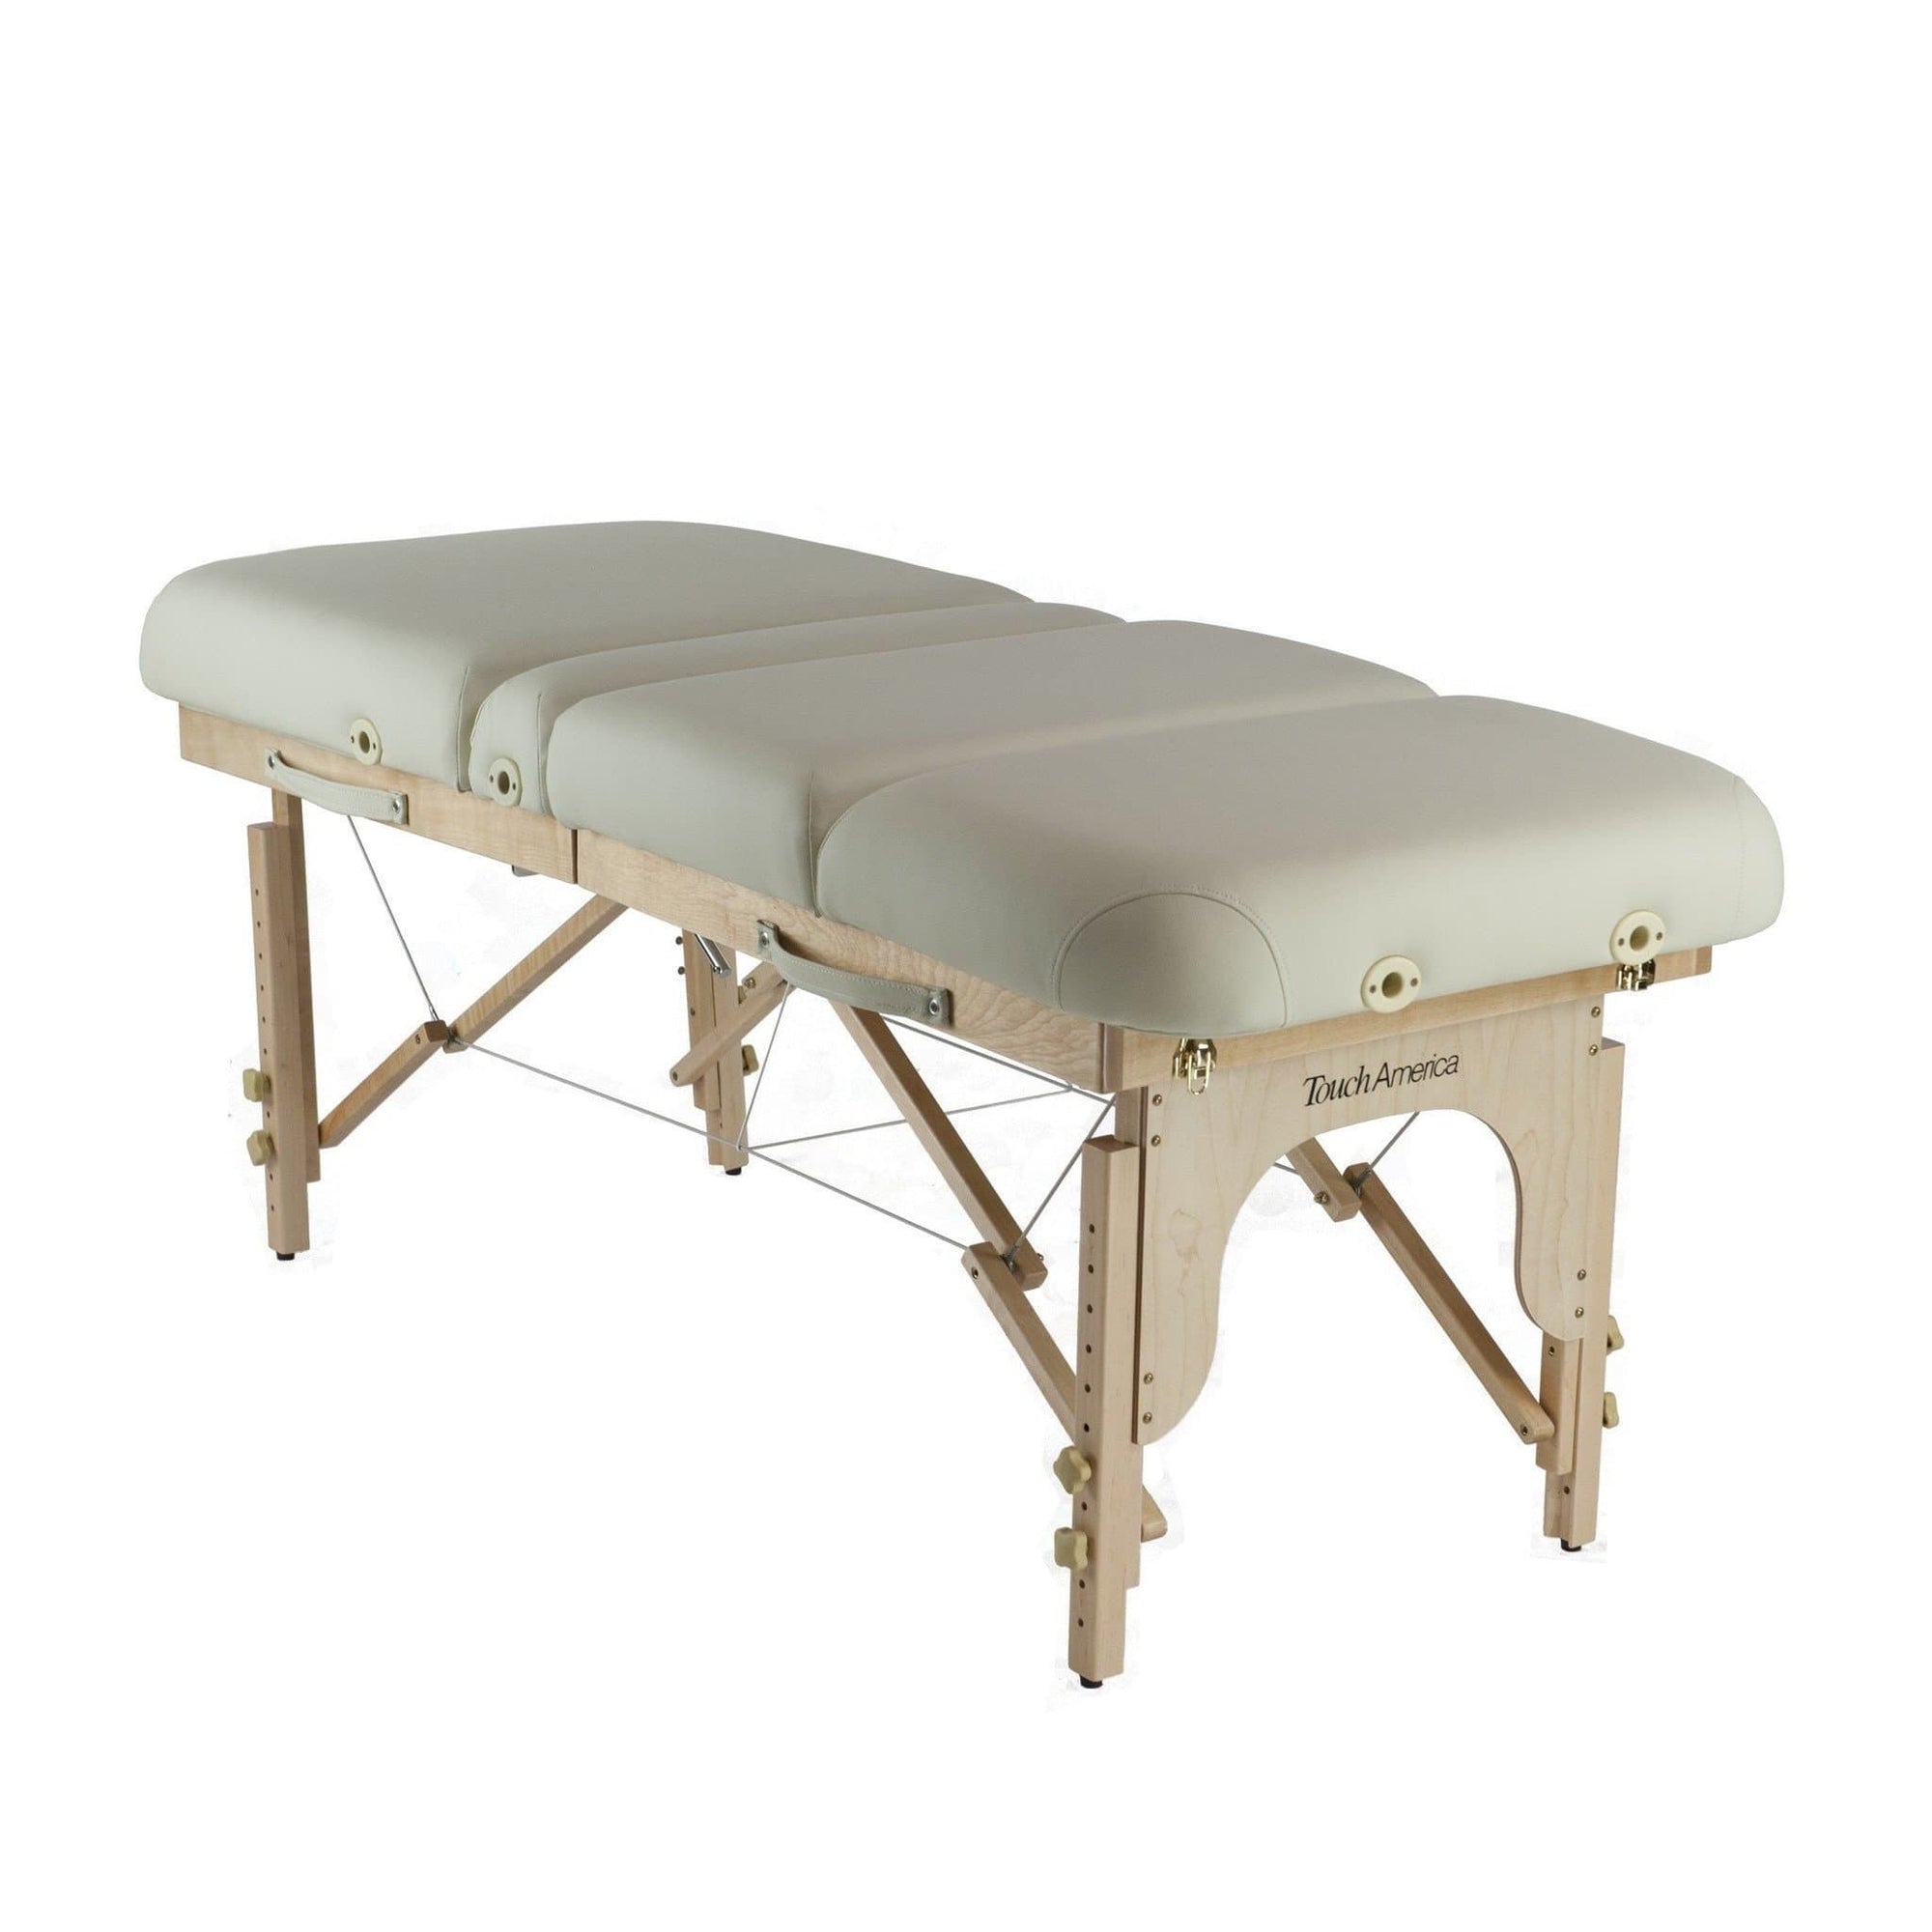 Touch America Touch America Portable MultiPro Multipurpose Facial Spa Massage & Treatment Table Portable Massage Table - ChairsThatGive